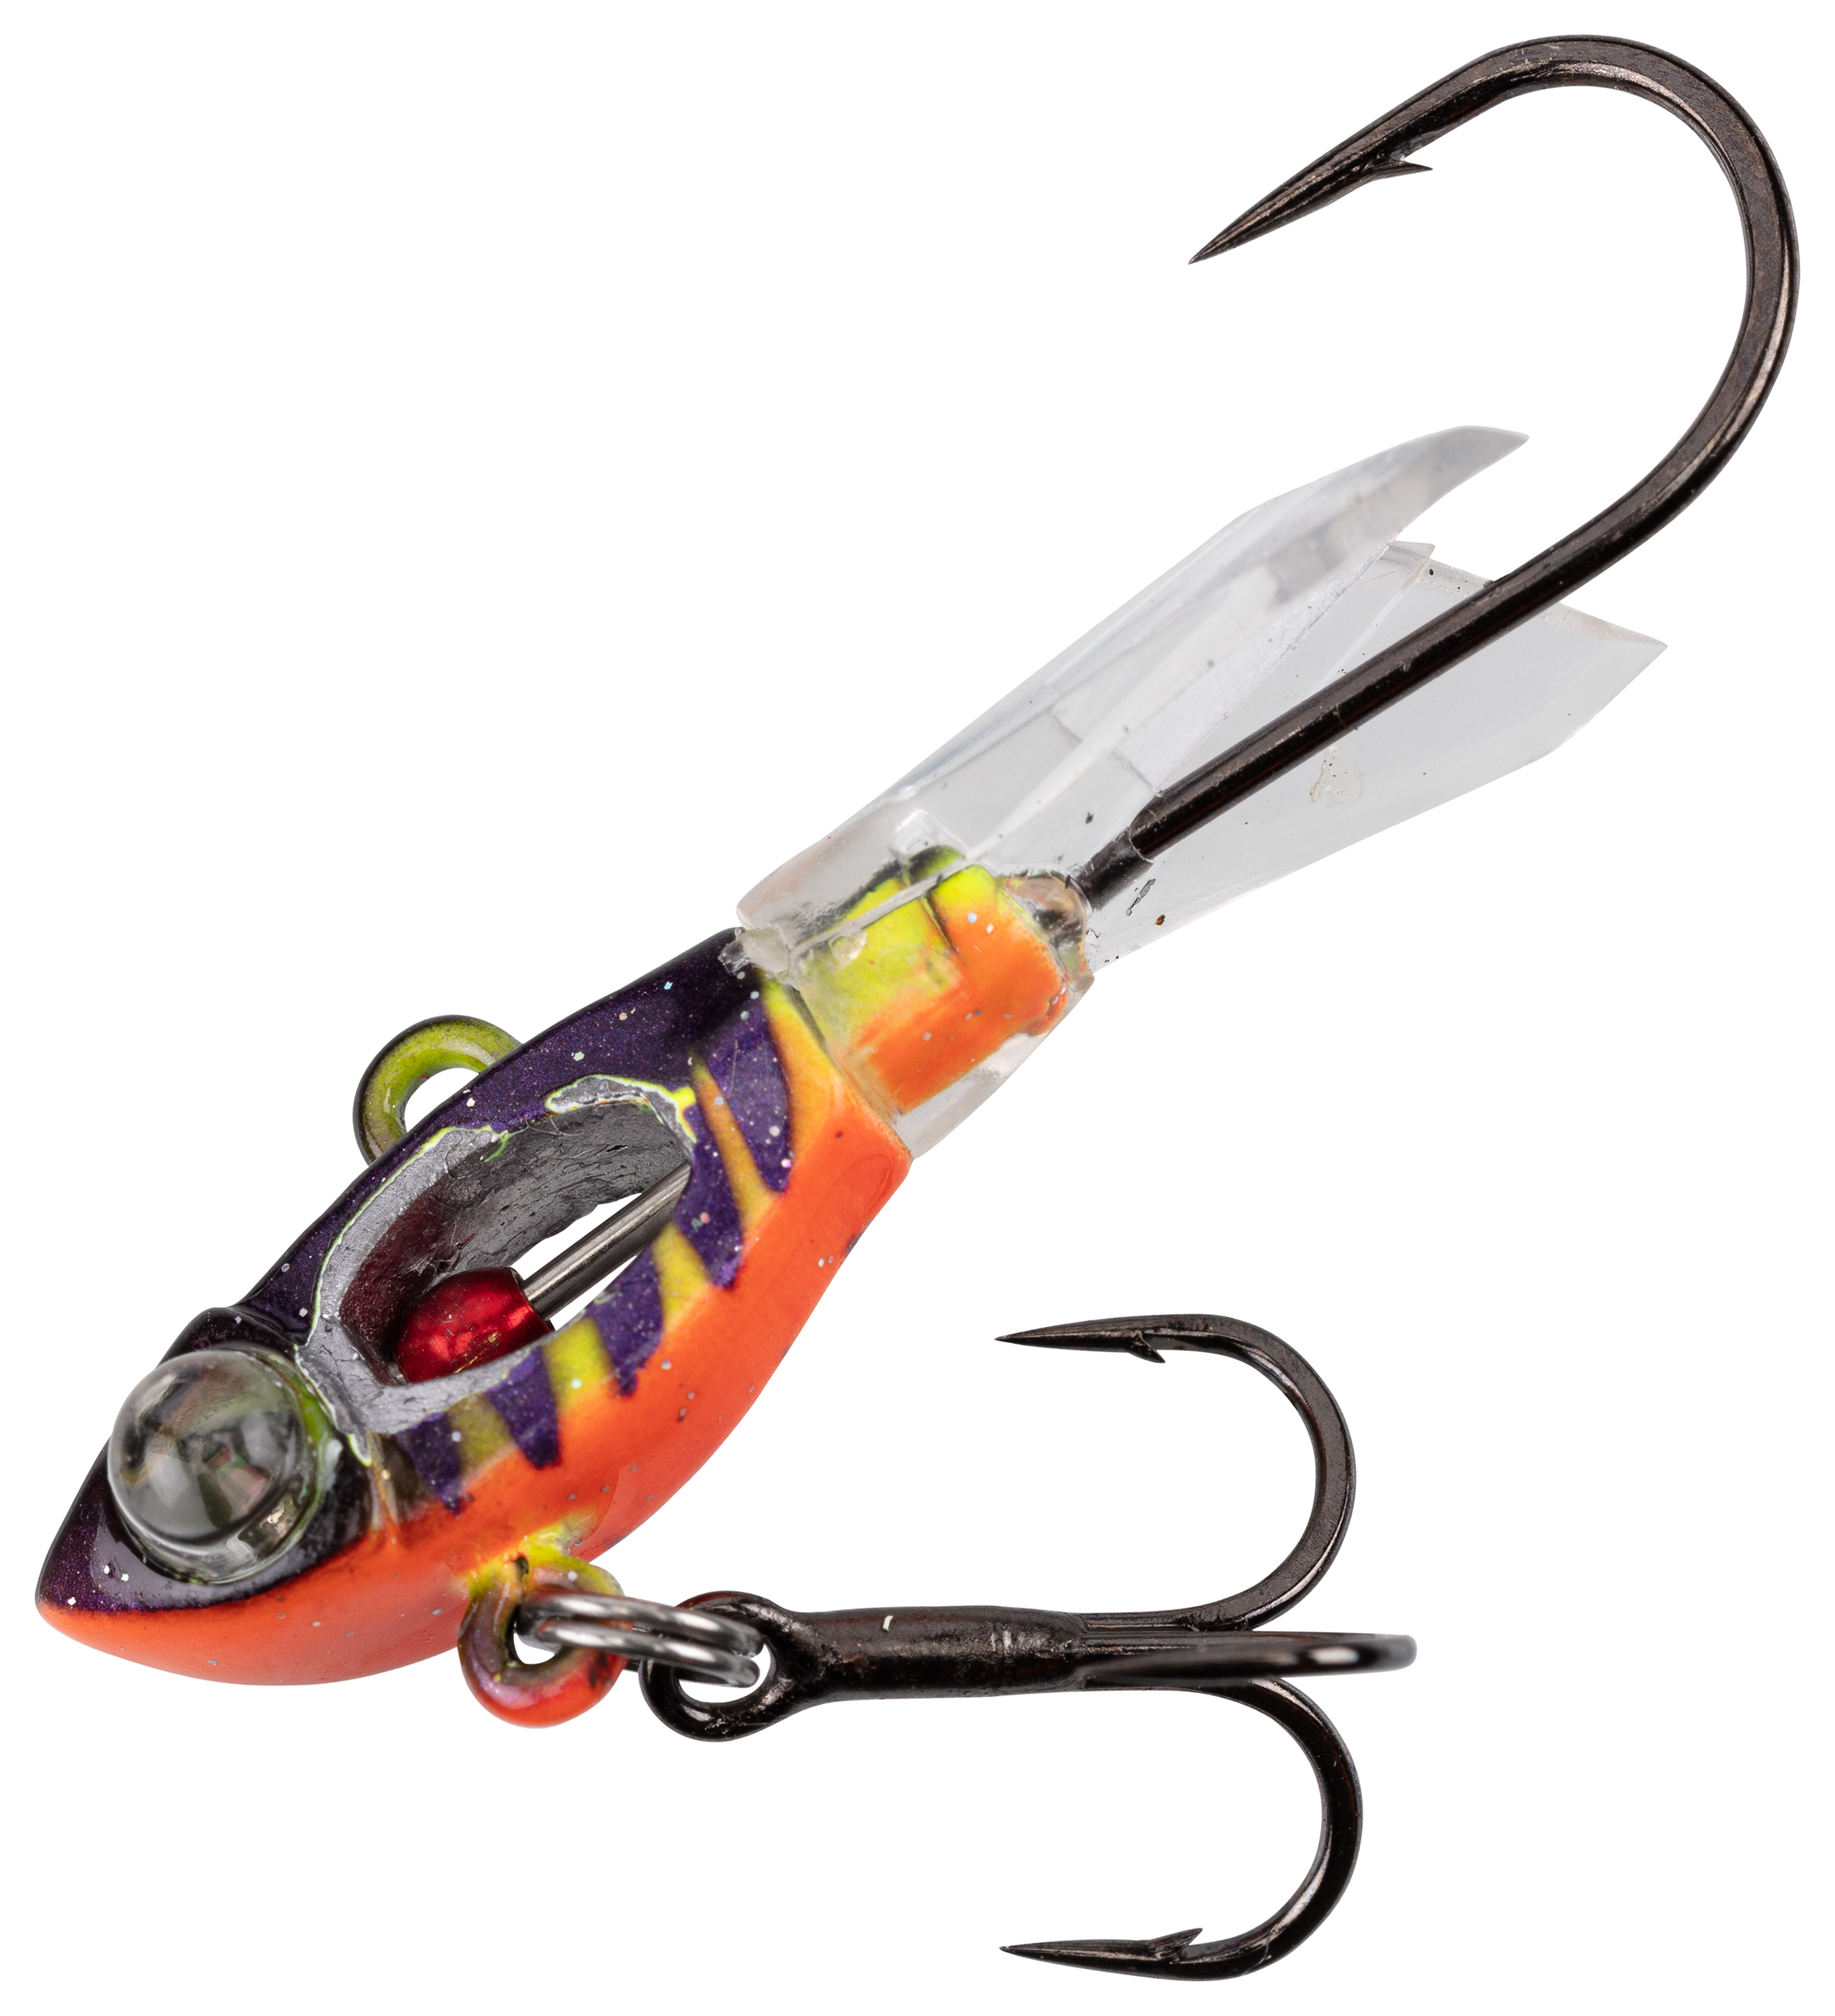 ACME Hyper-Glide - Extreme Tackle